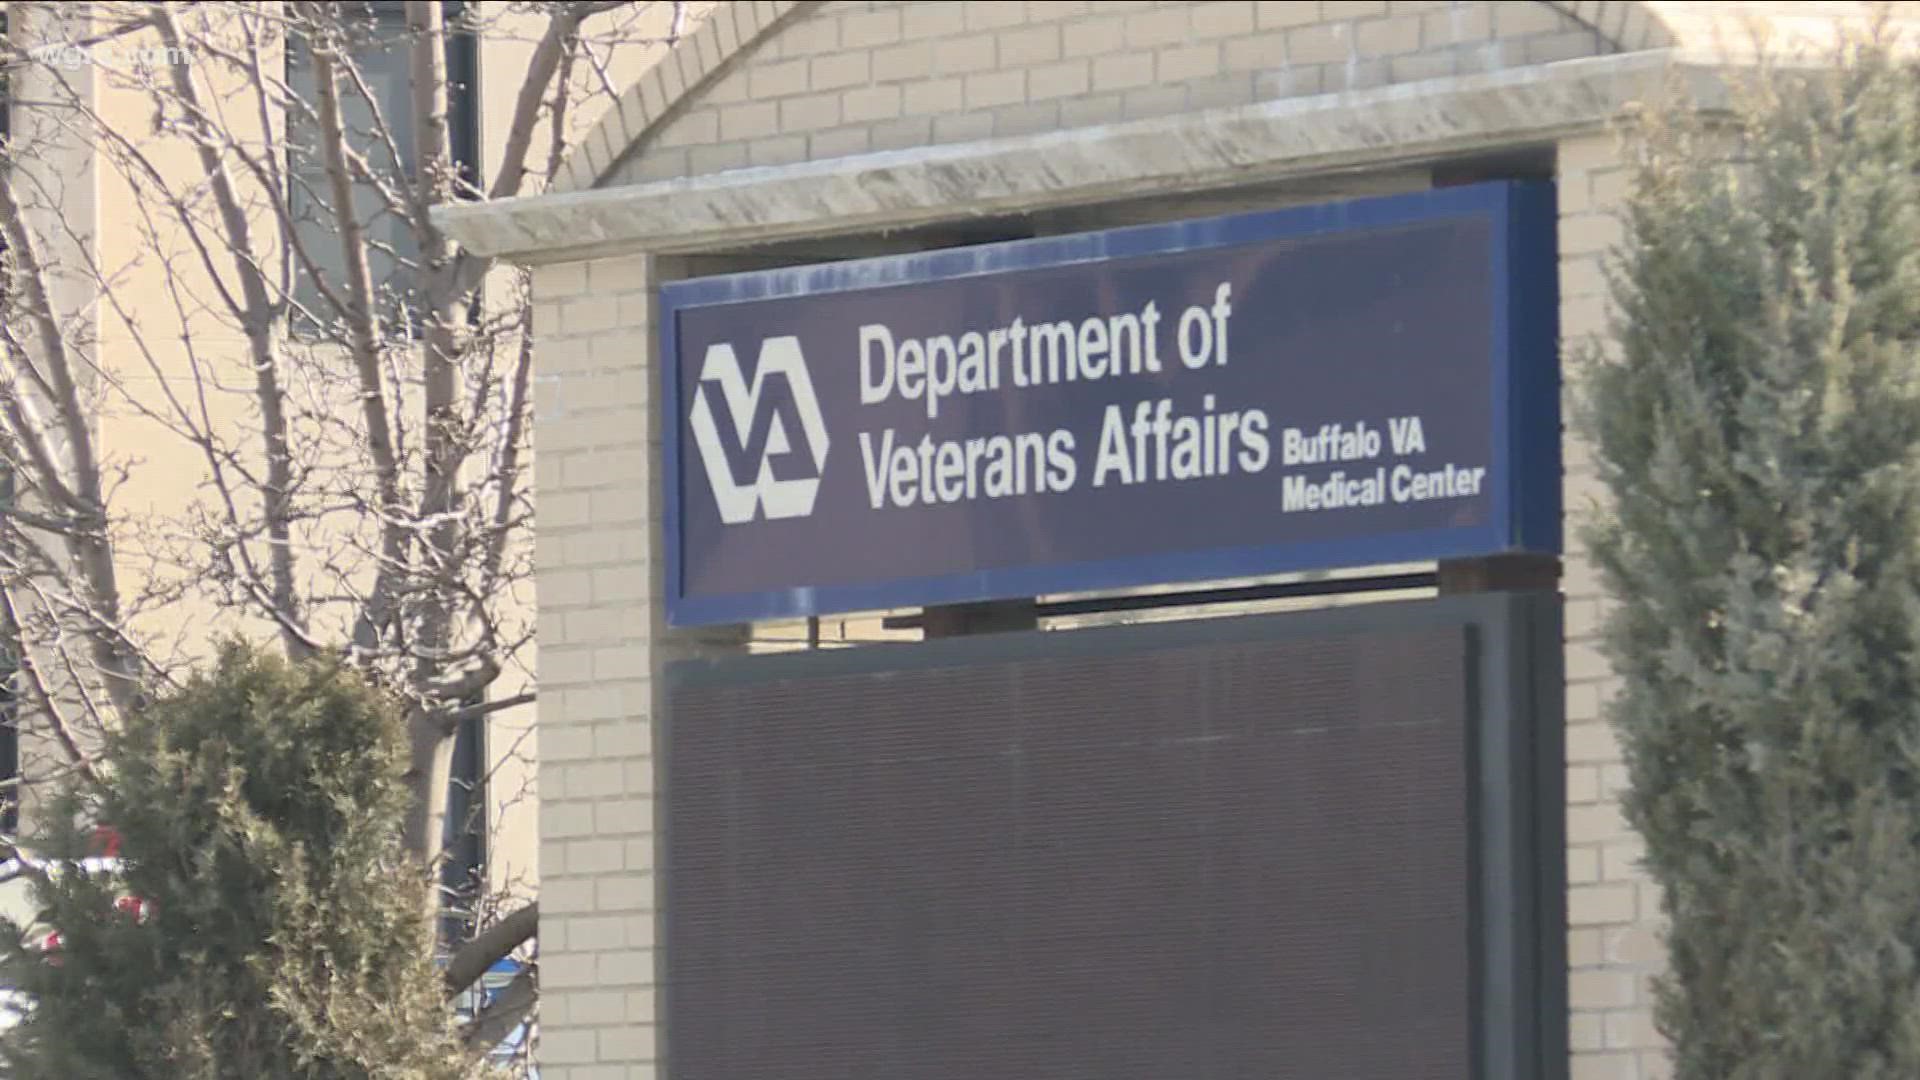 A new plan could be in the works to build new VA hospitals in both Buffalo and Batavia. They would replace aging, obsolete facilities.